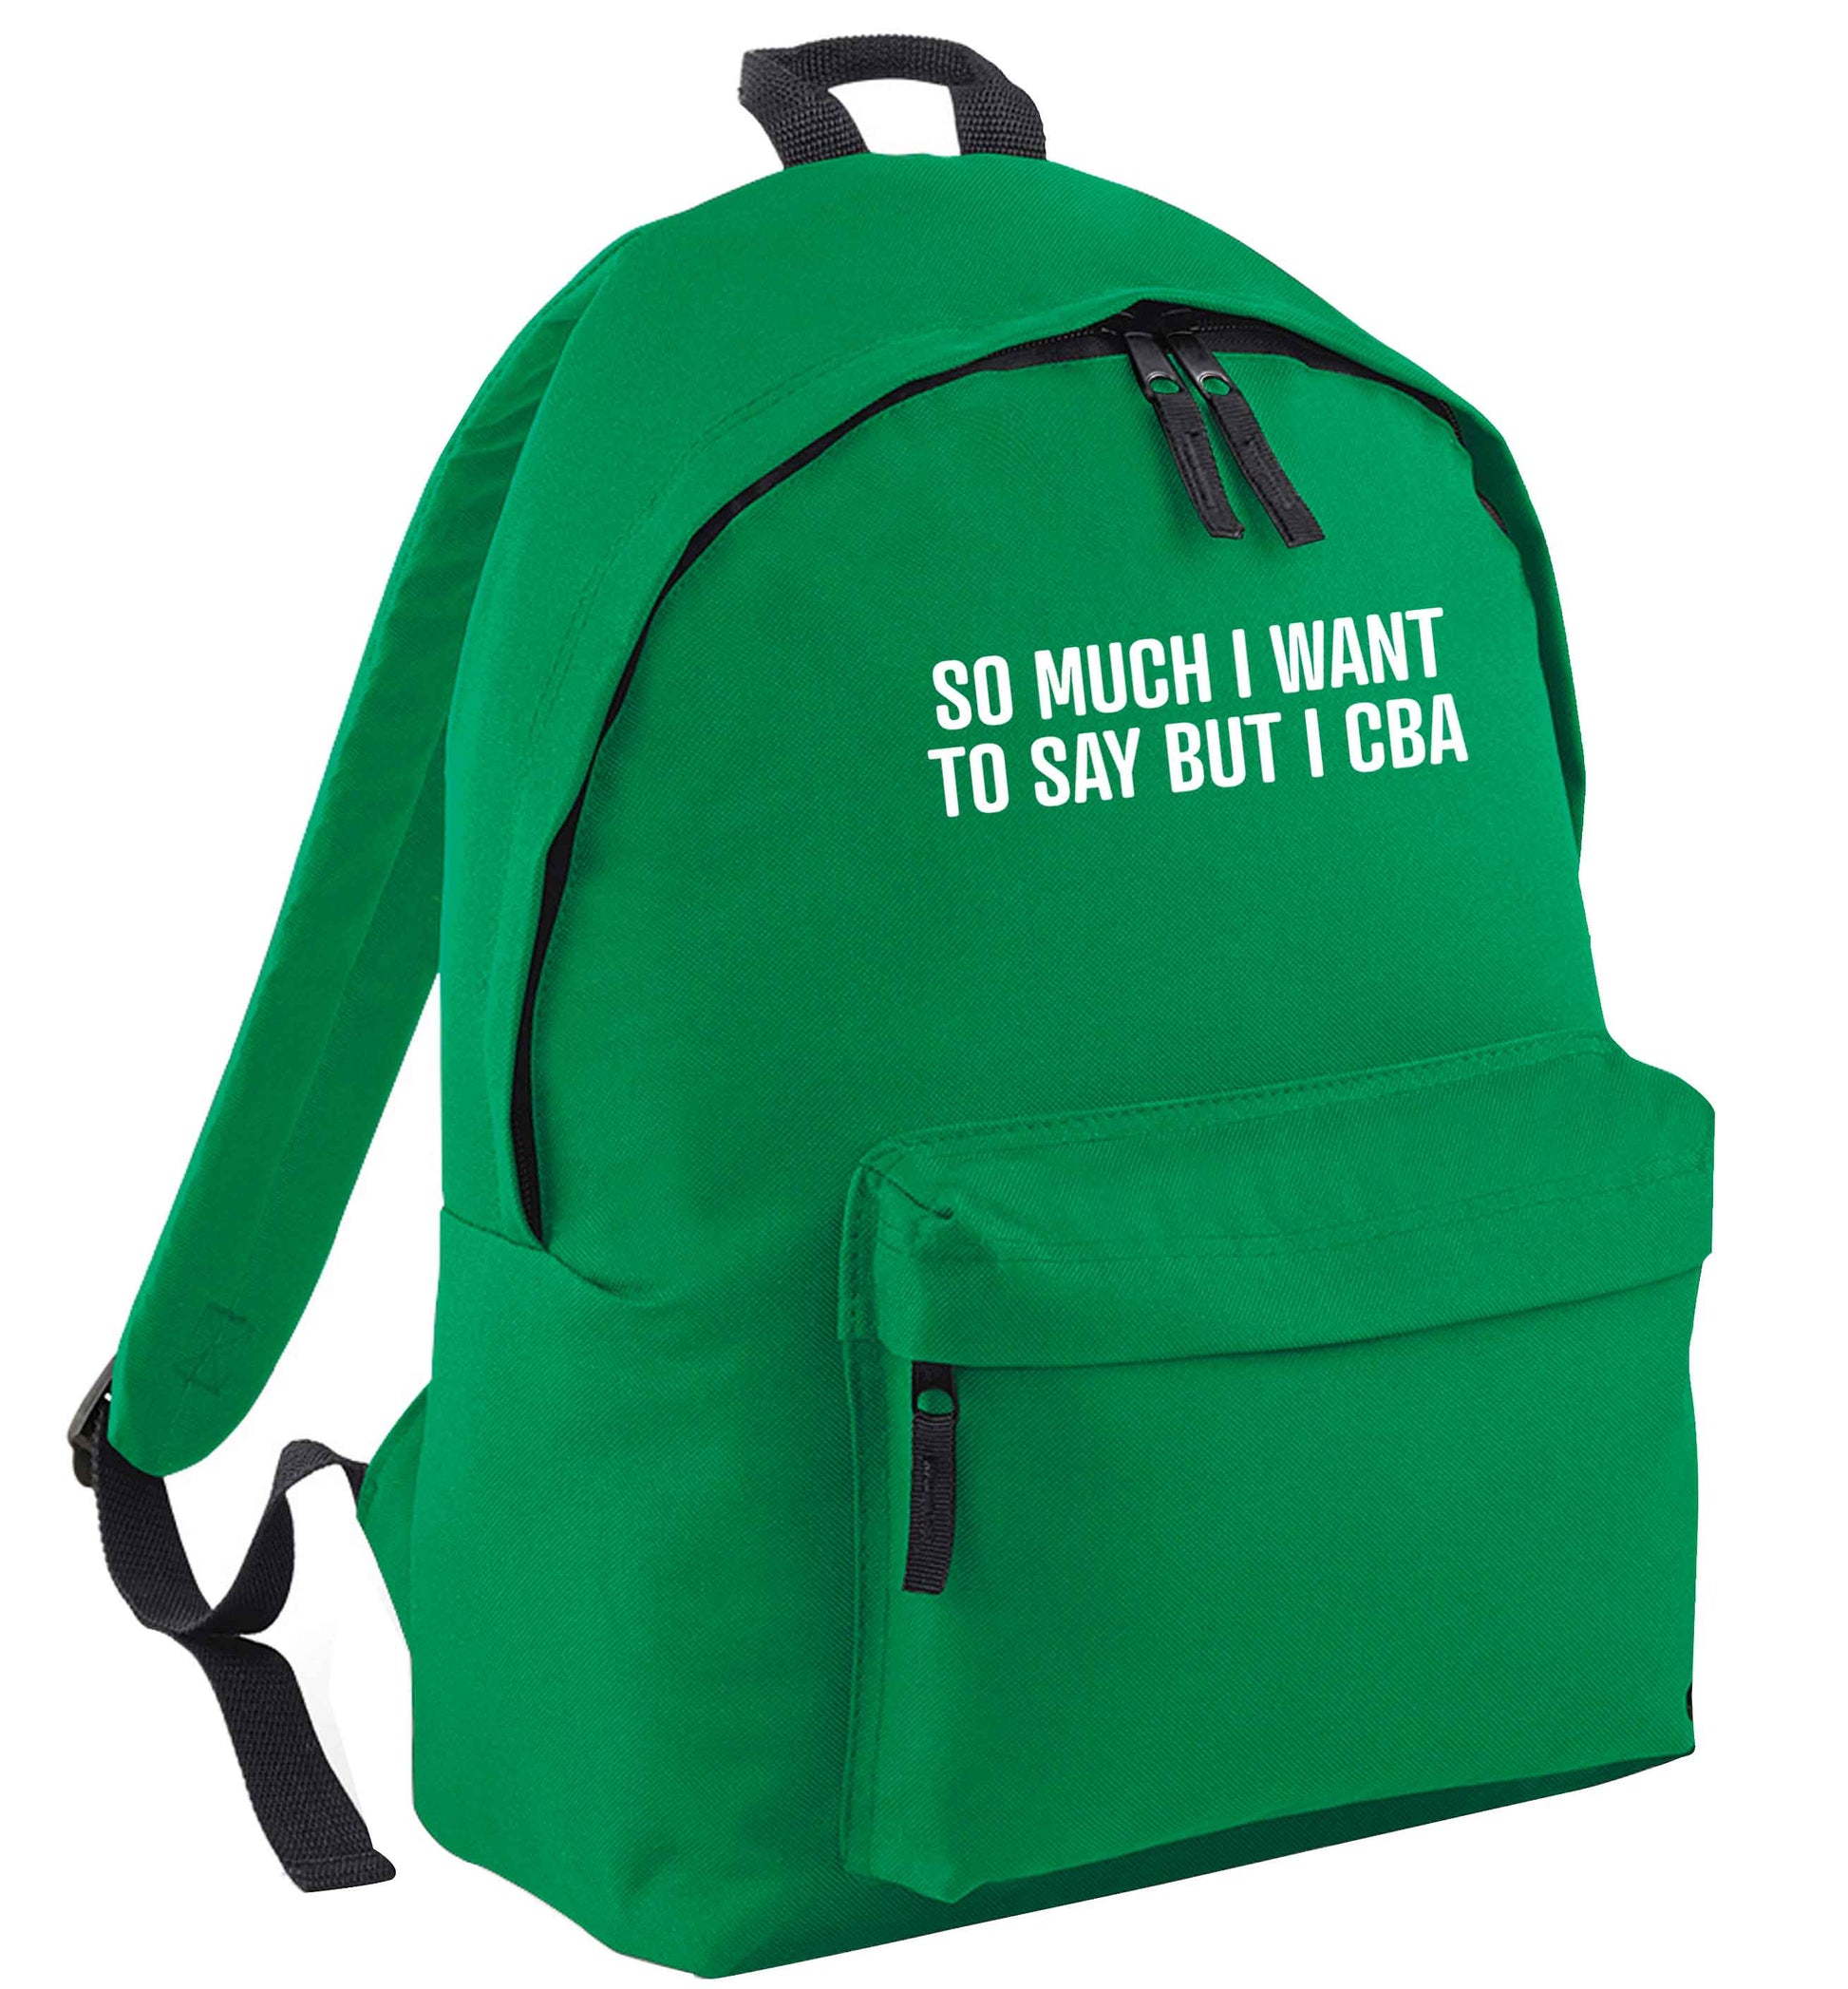 So much I want to say I cba  green adults backpack